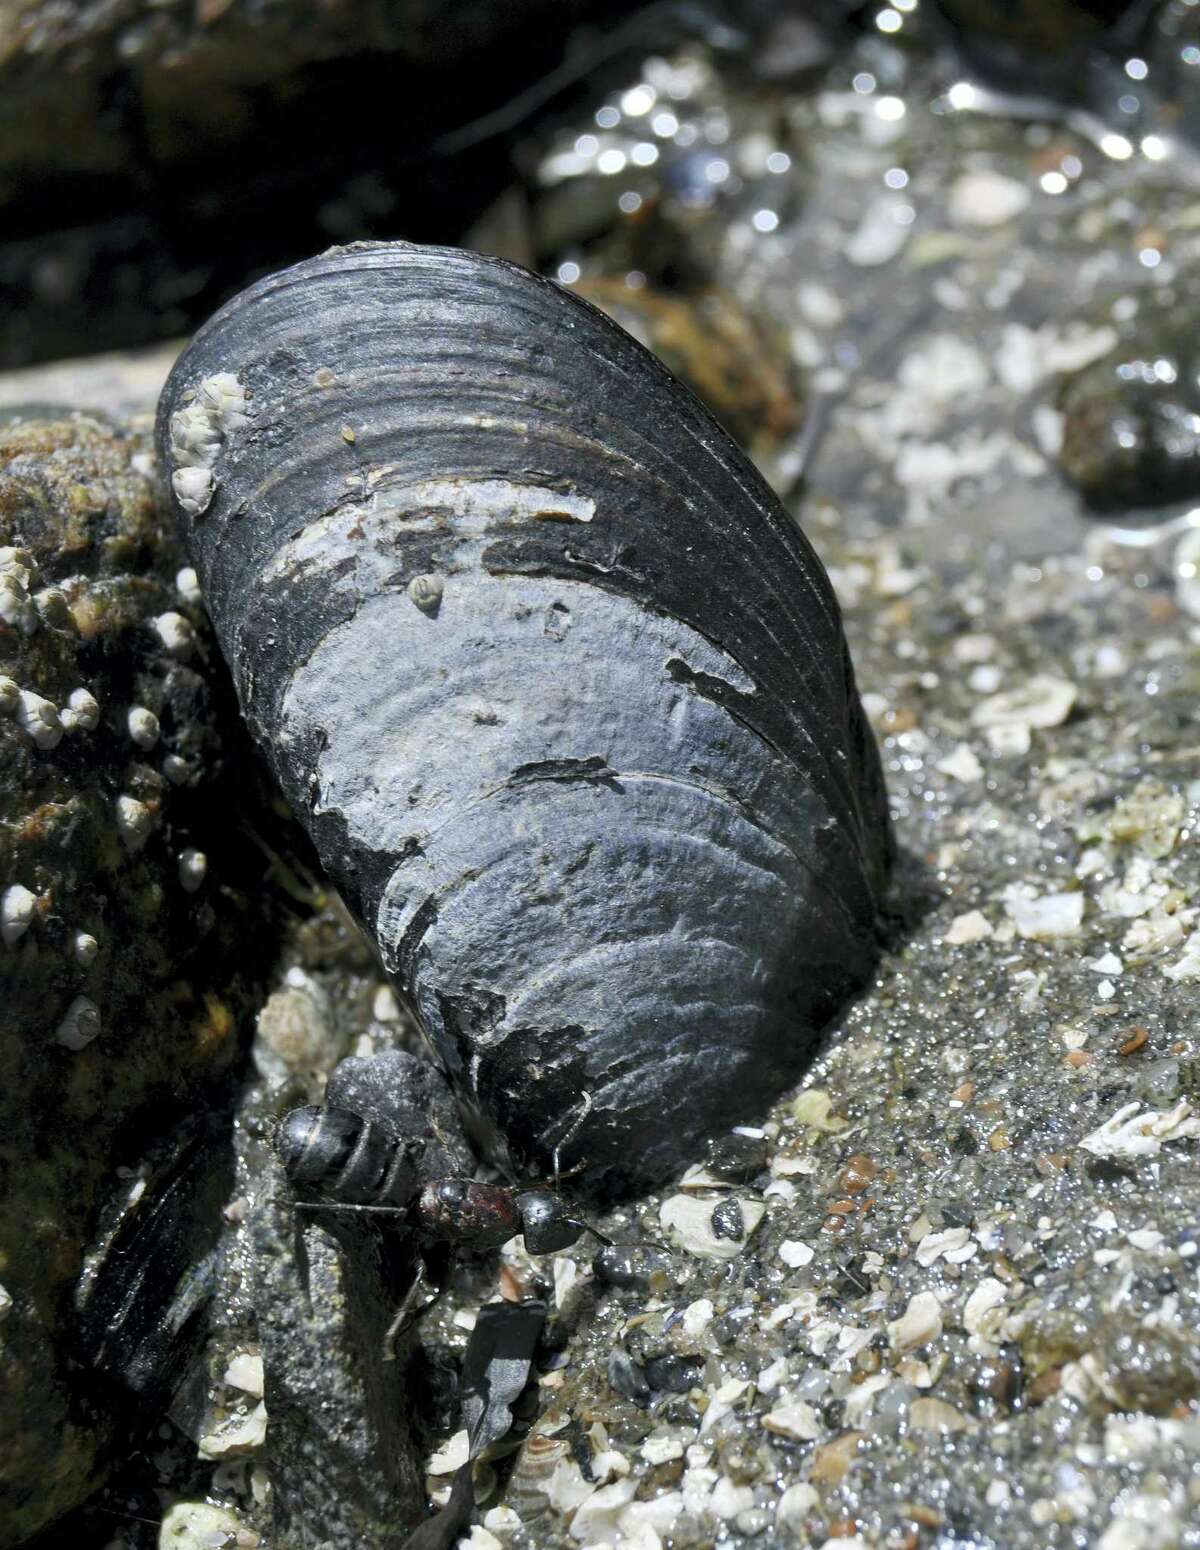 In this 2014 photo provided by the University of California, Irvine, a blue mussel clings to a rock at Mount Desert Island, on the Maine coast. A 2016 scientific study said the mussels, which are beloved by seafood fans, have declined dramatically in the Gulf of Maine.